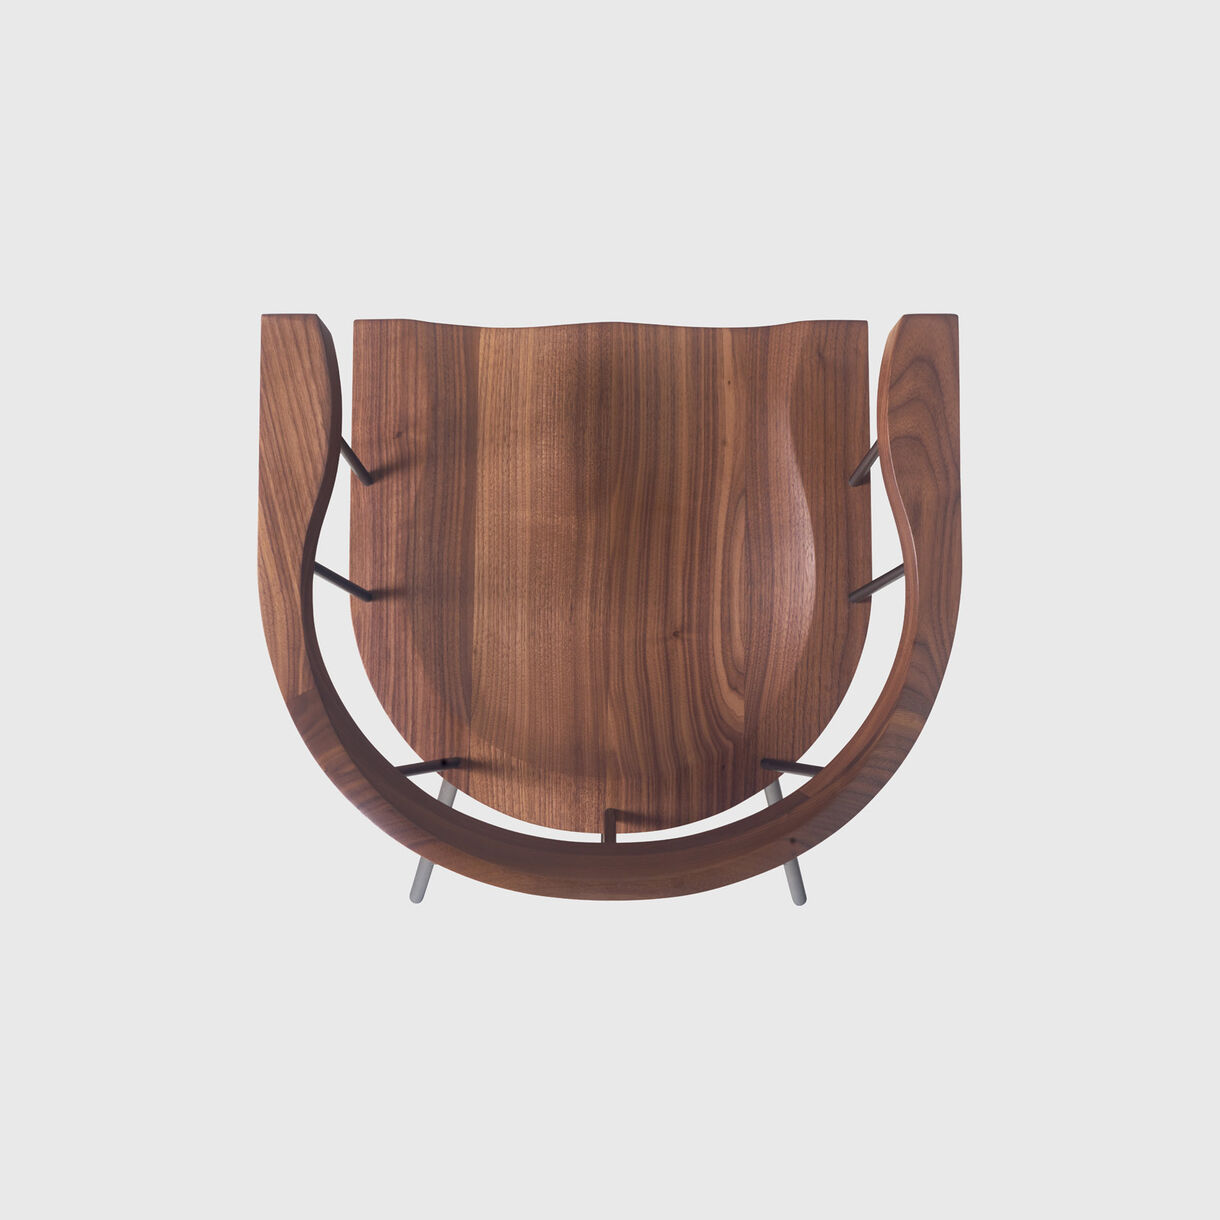 Spindle Counter Chair, Walnut, Bronze